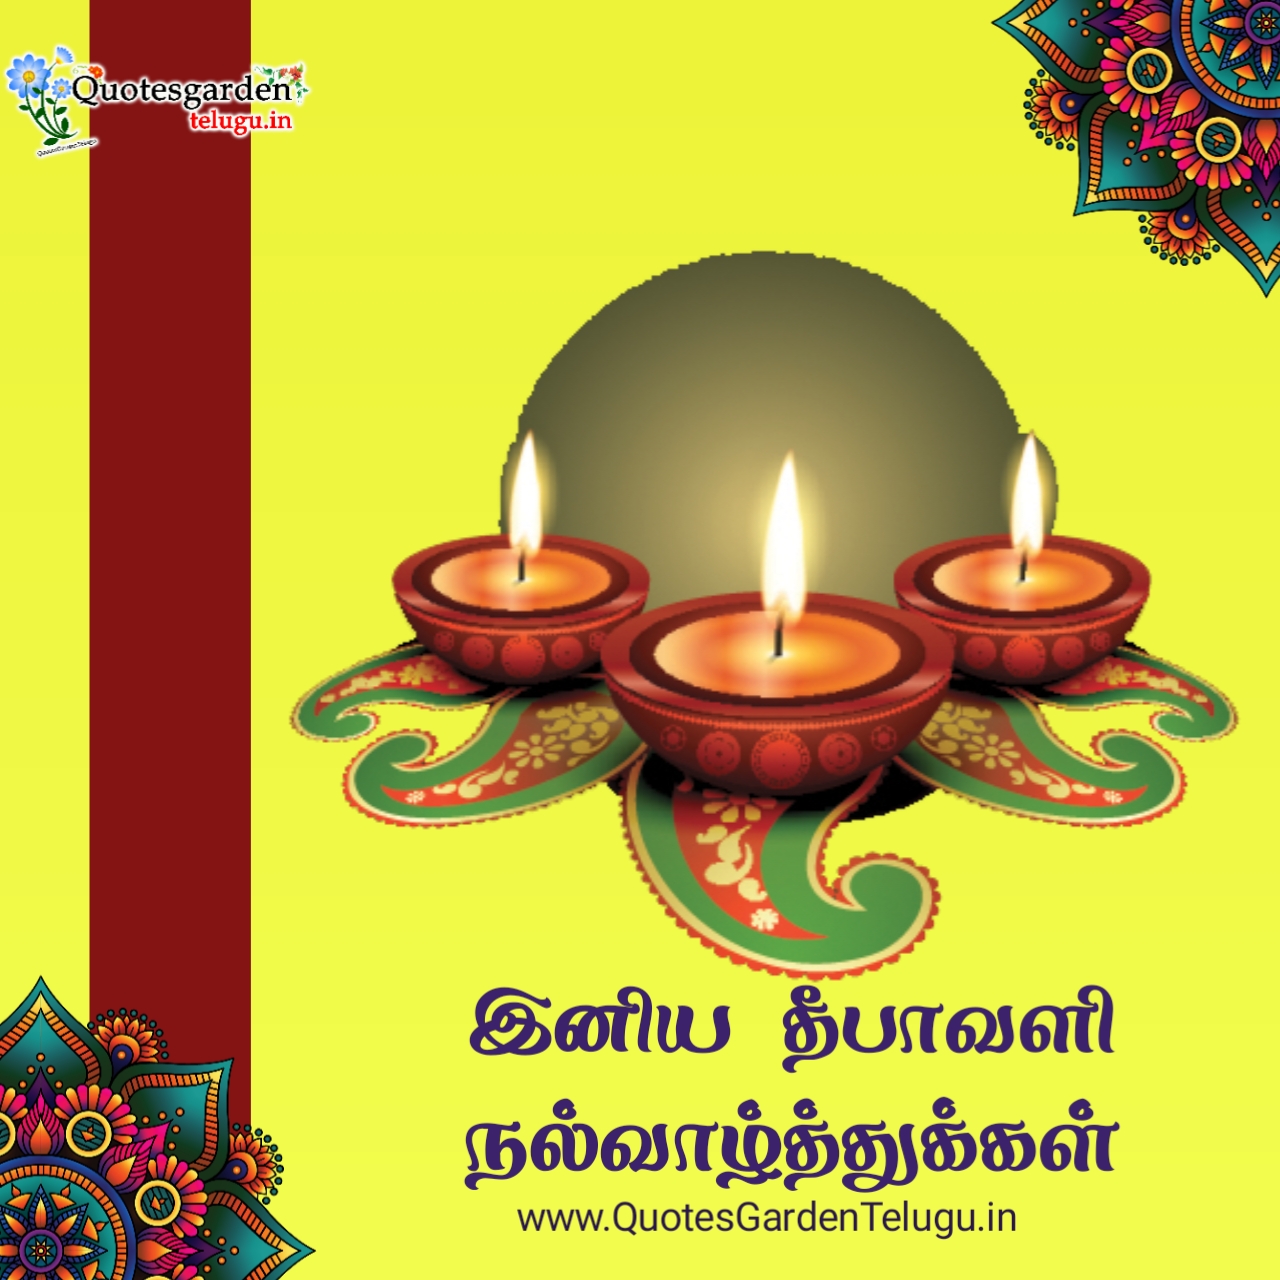 best Diwali 2020 wishes quotes greetings kavithai in tamil ...